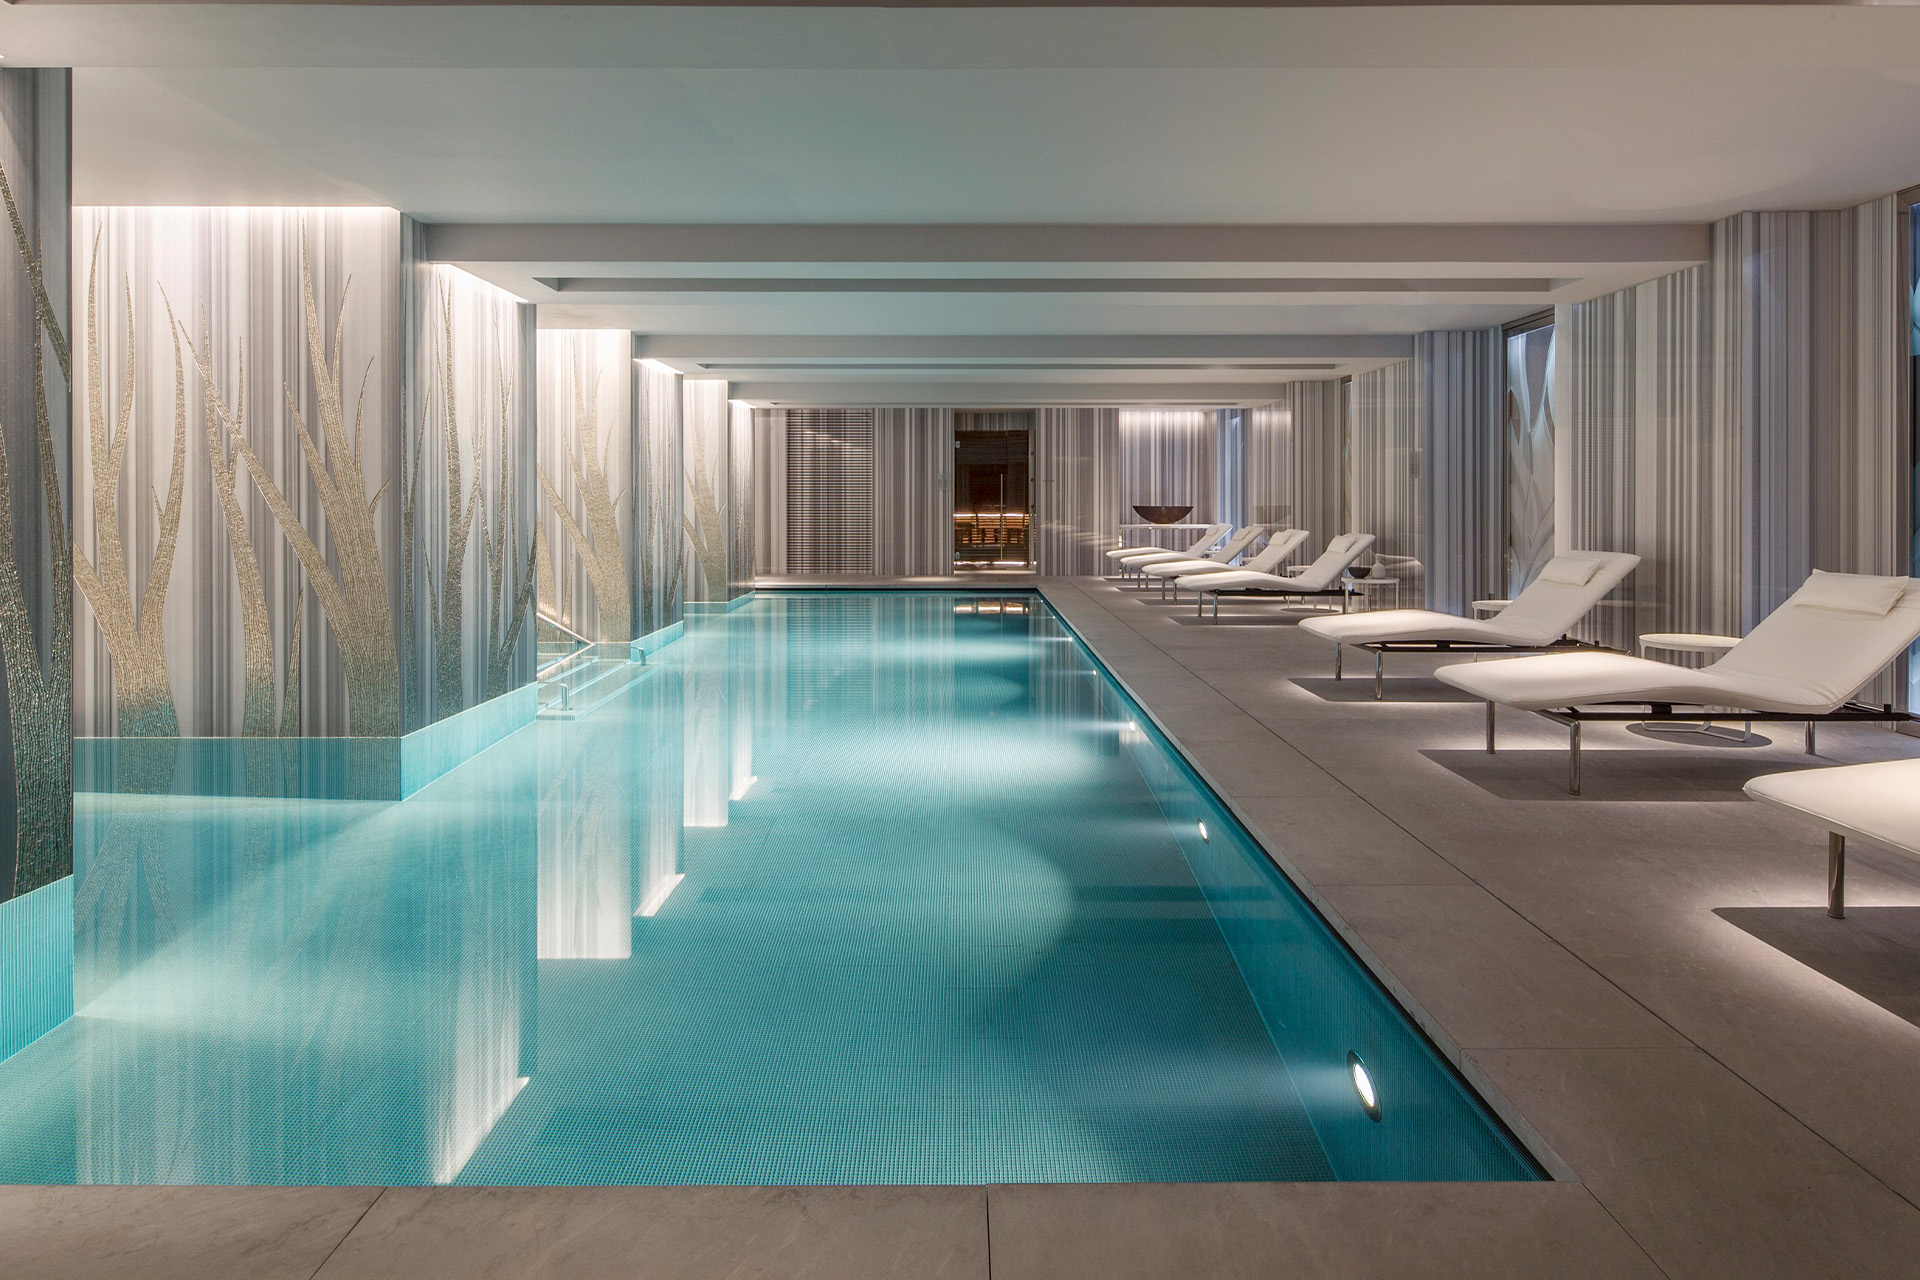 Spa Weekend: Four Seasons Hotel At Ten Trinity Square - Hotel Review